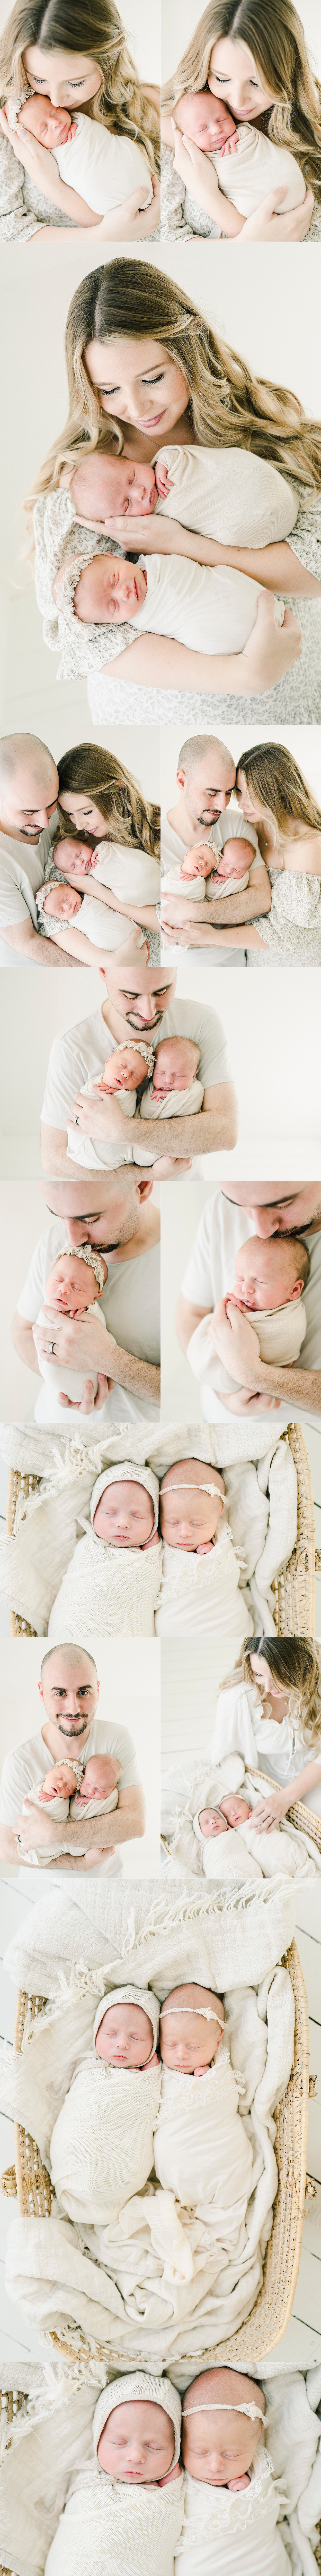 newborn baby twins in newborn session with their parents